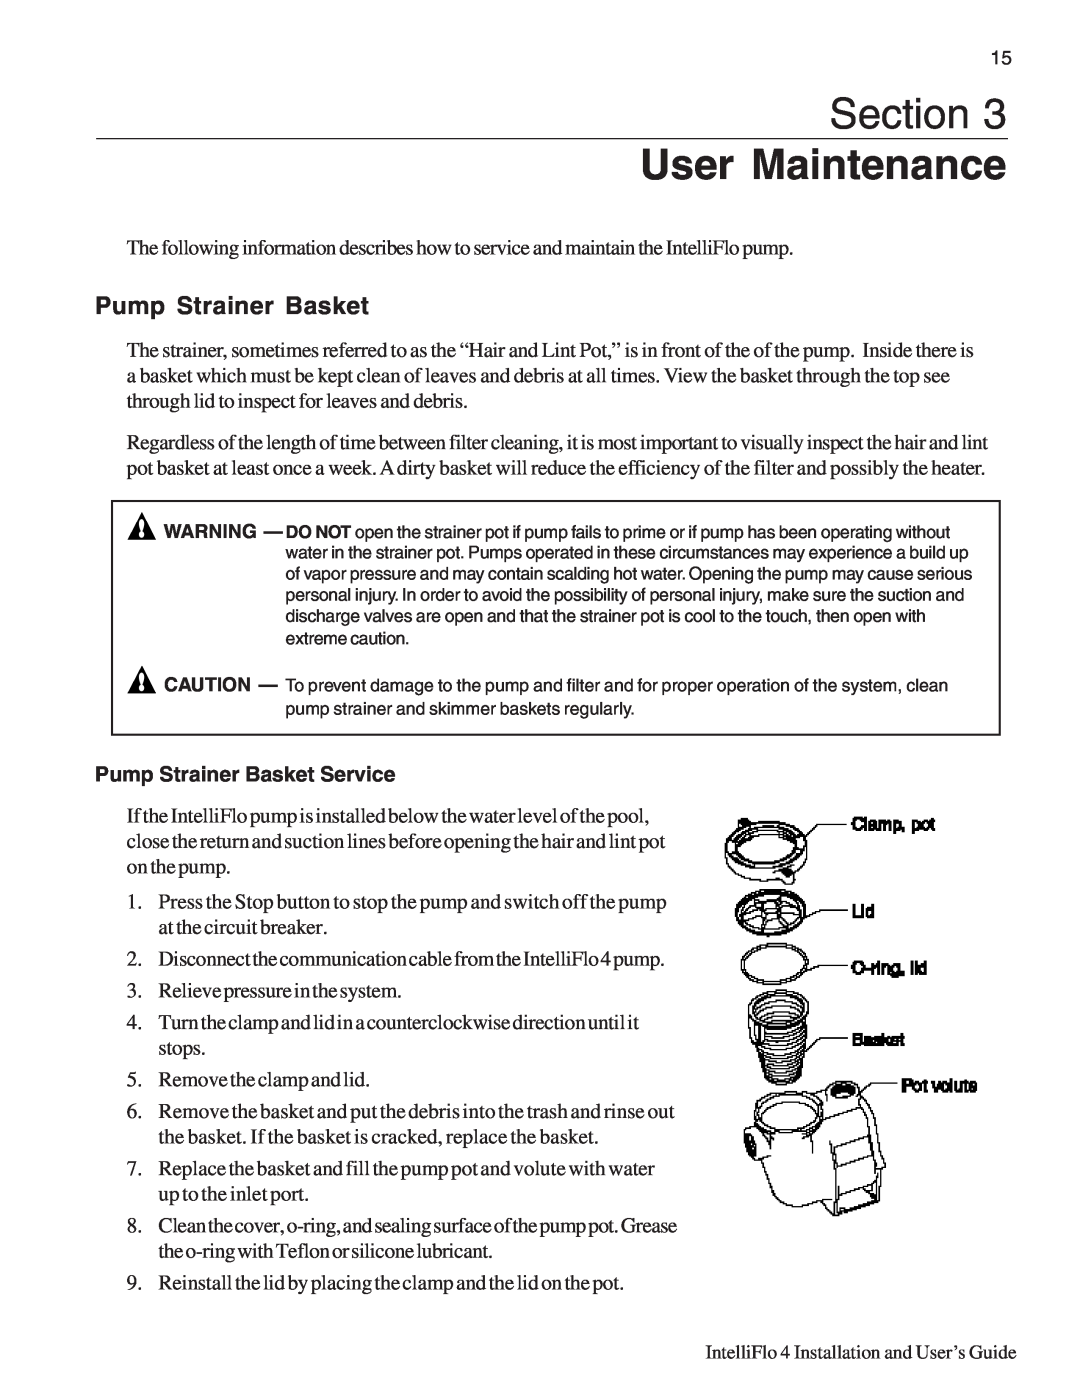 Pentair 4/100, 4/160 important safety instructions User Maintenance, Section, Pump Strainer Basket Service 